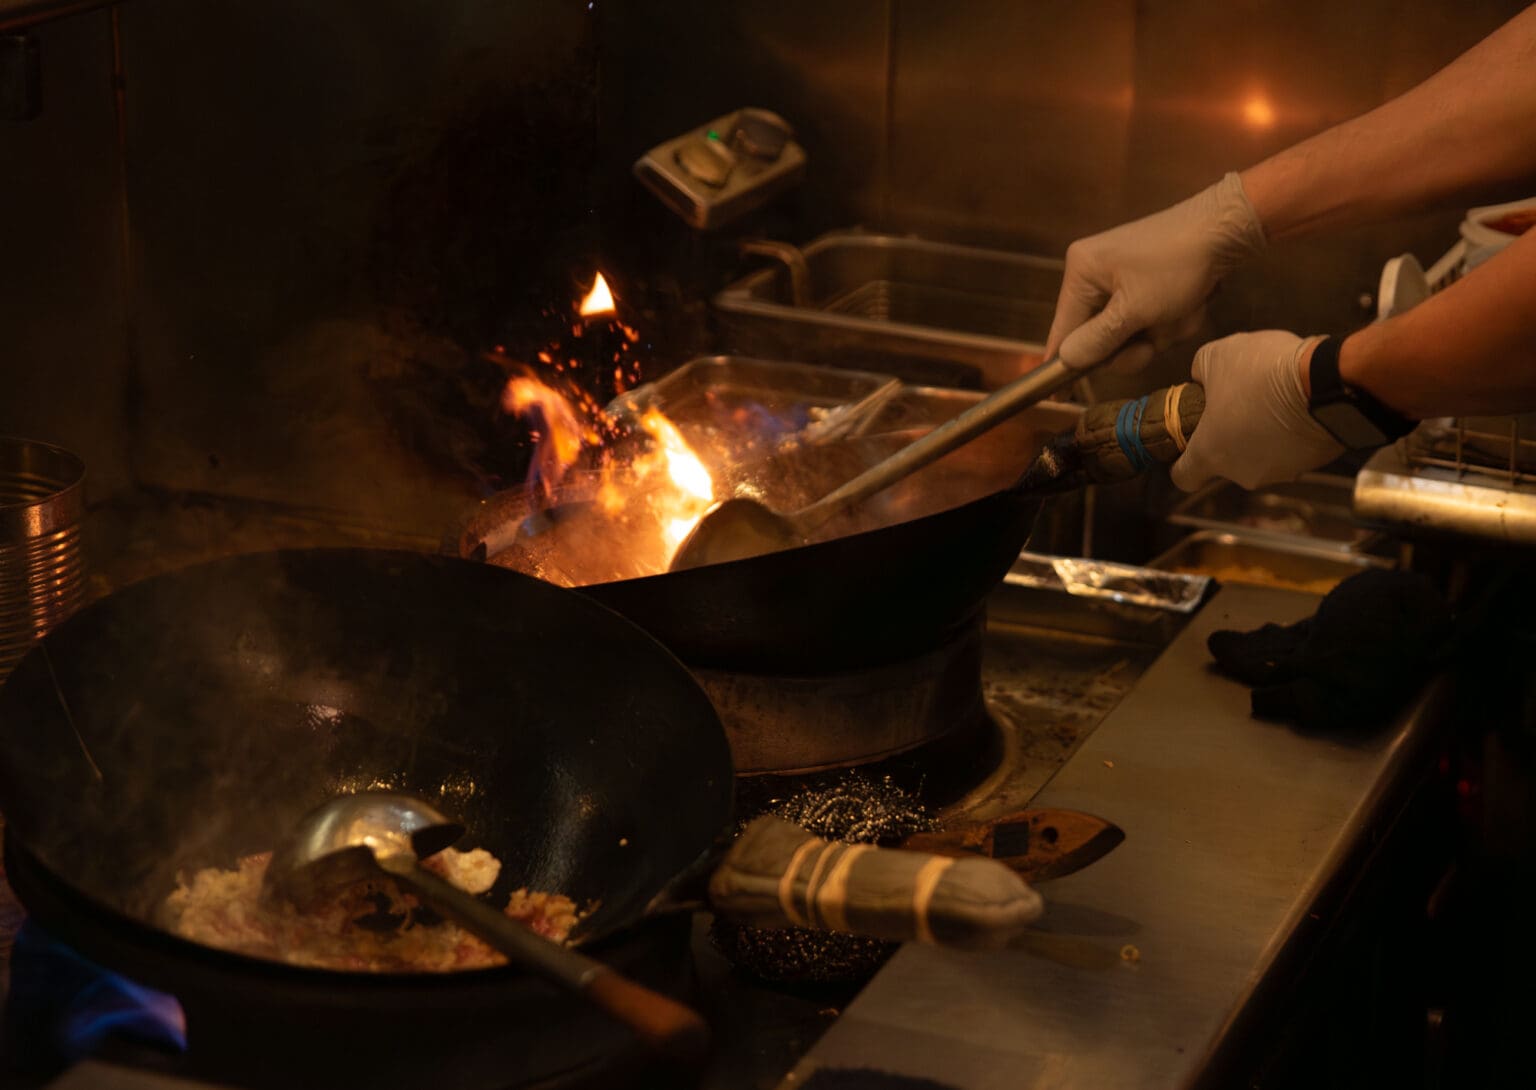 A chef at Rachawadee Thai Cafe fires up a wok as he cooks a meal over the bright heat.